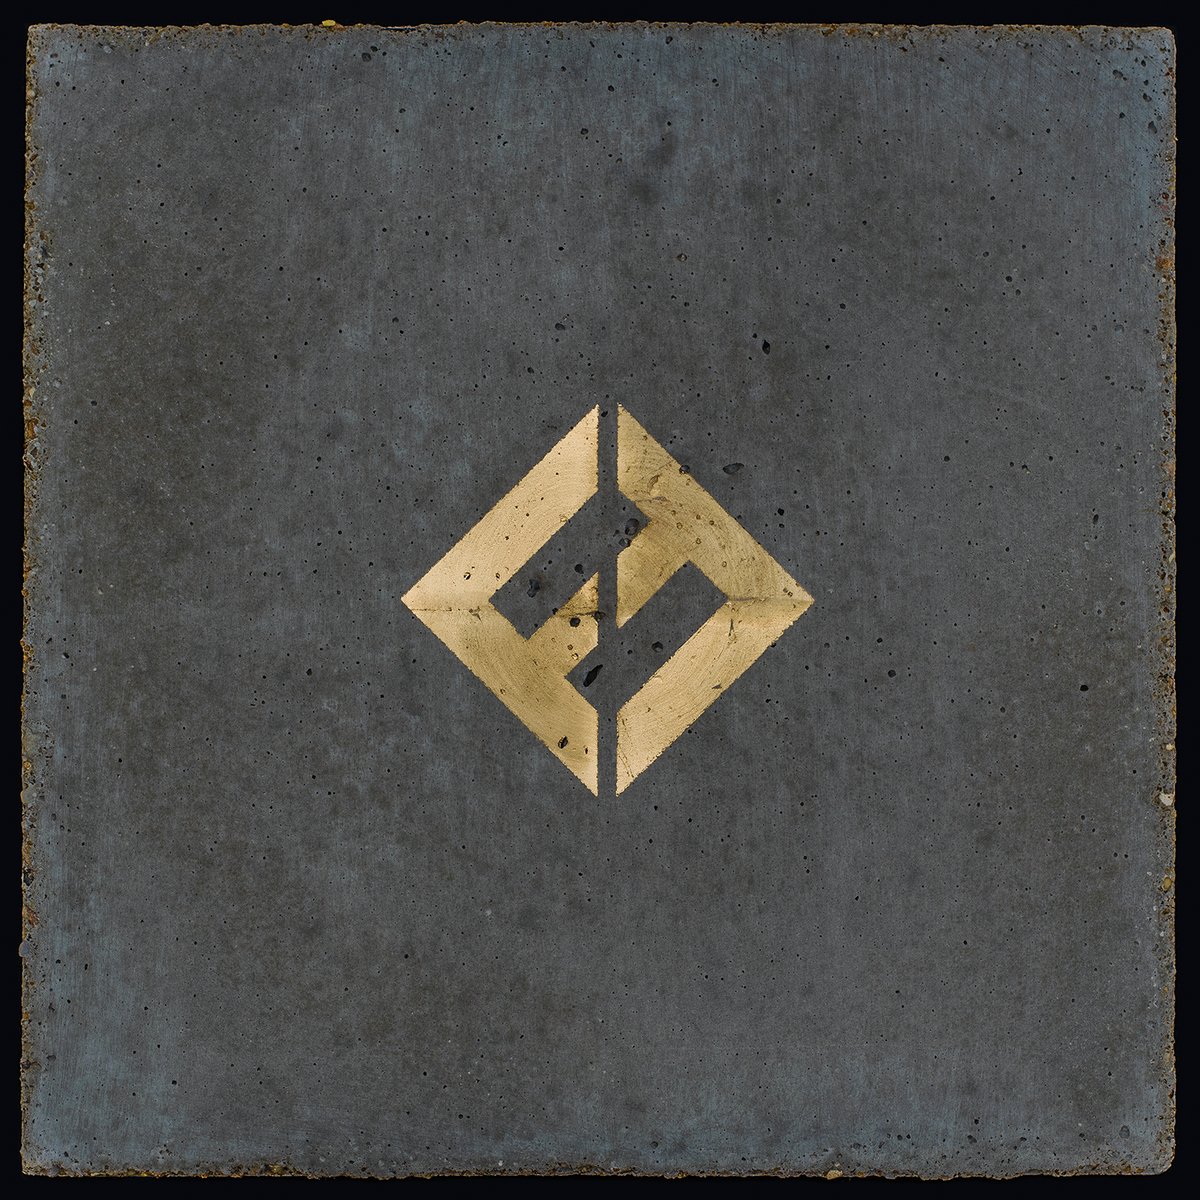 Foo Fighters "Concrete and Gold"